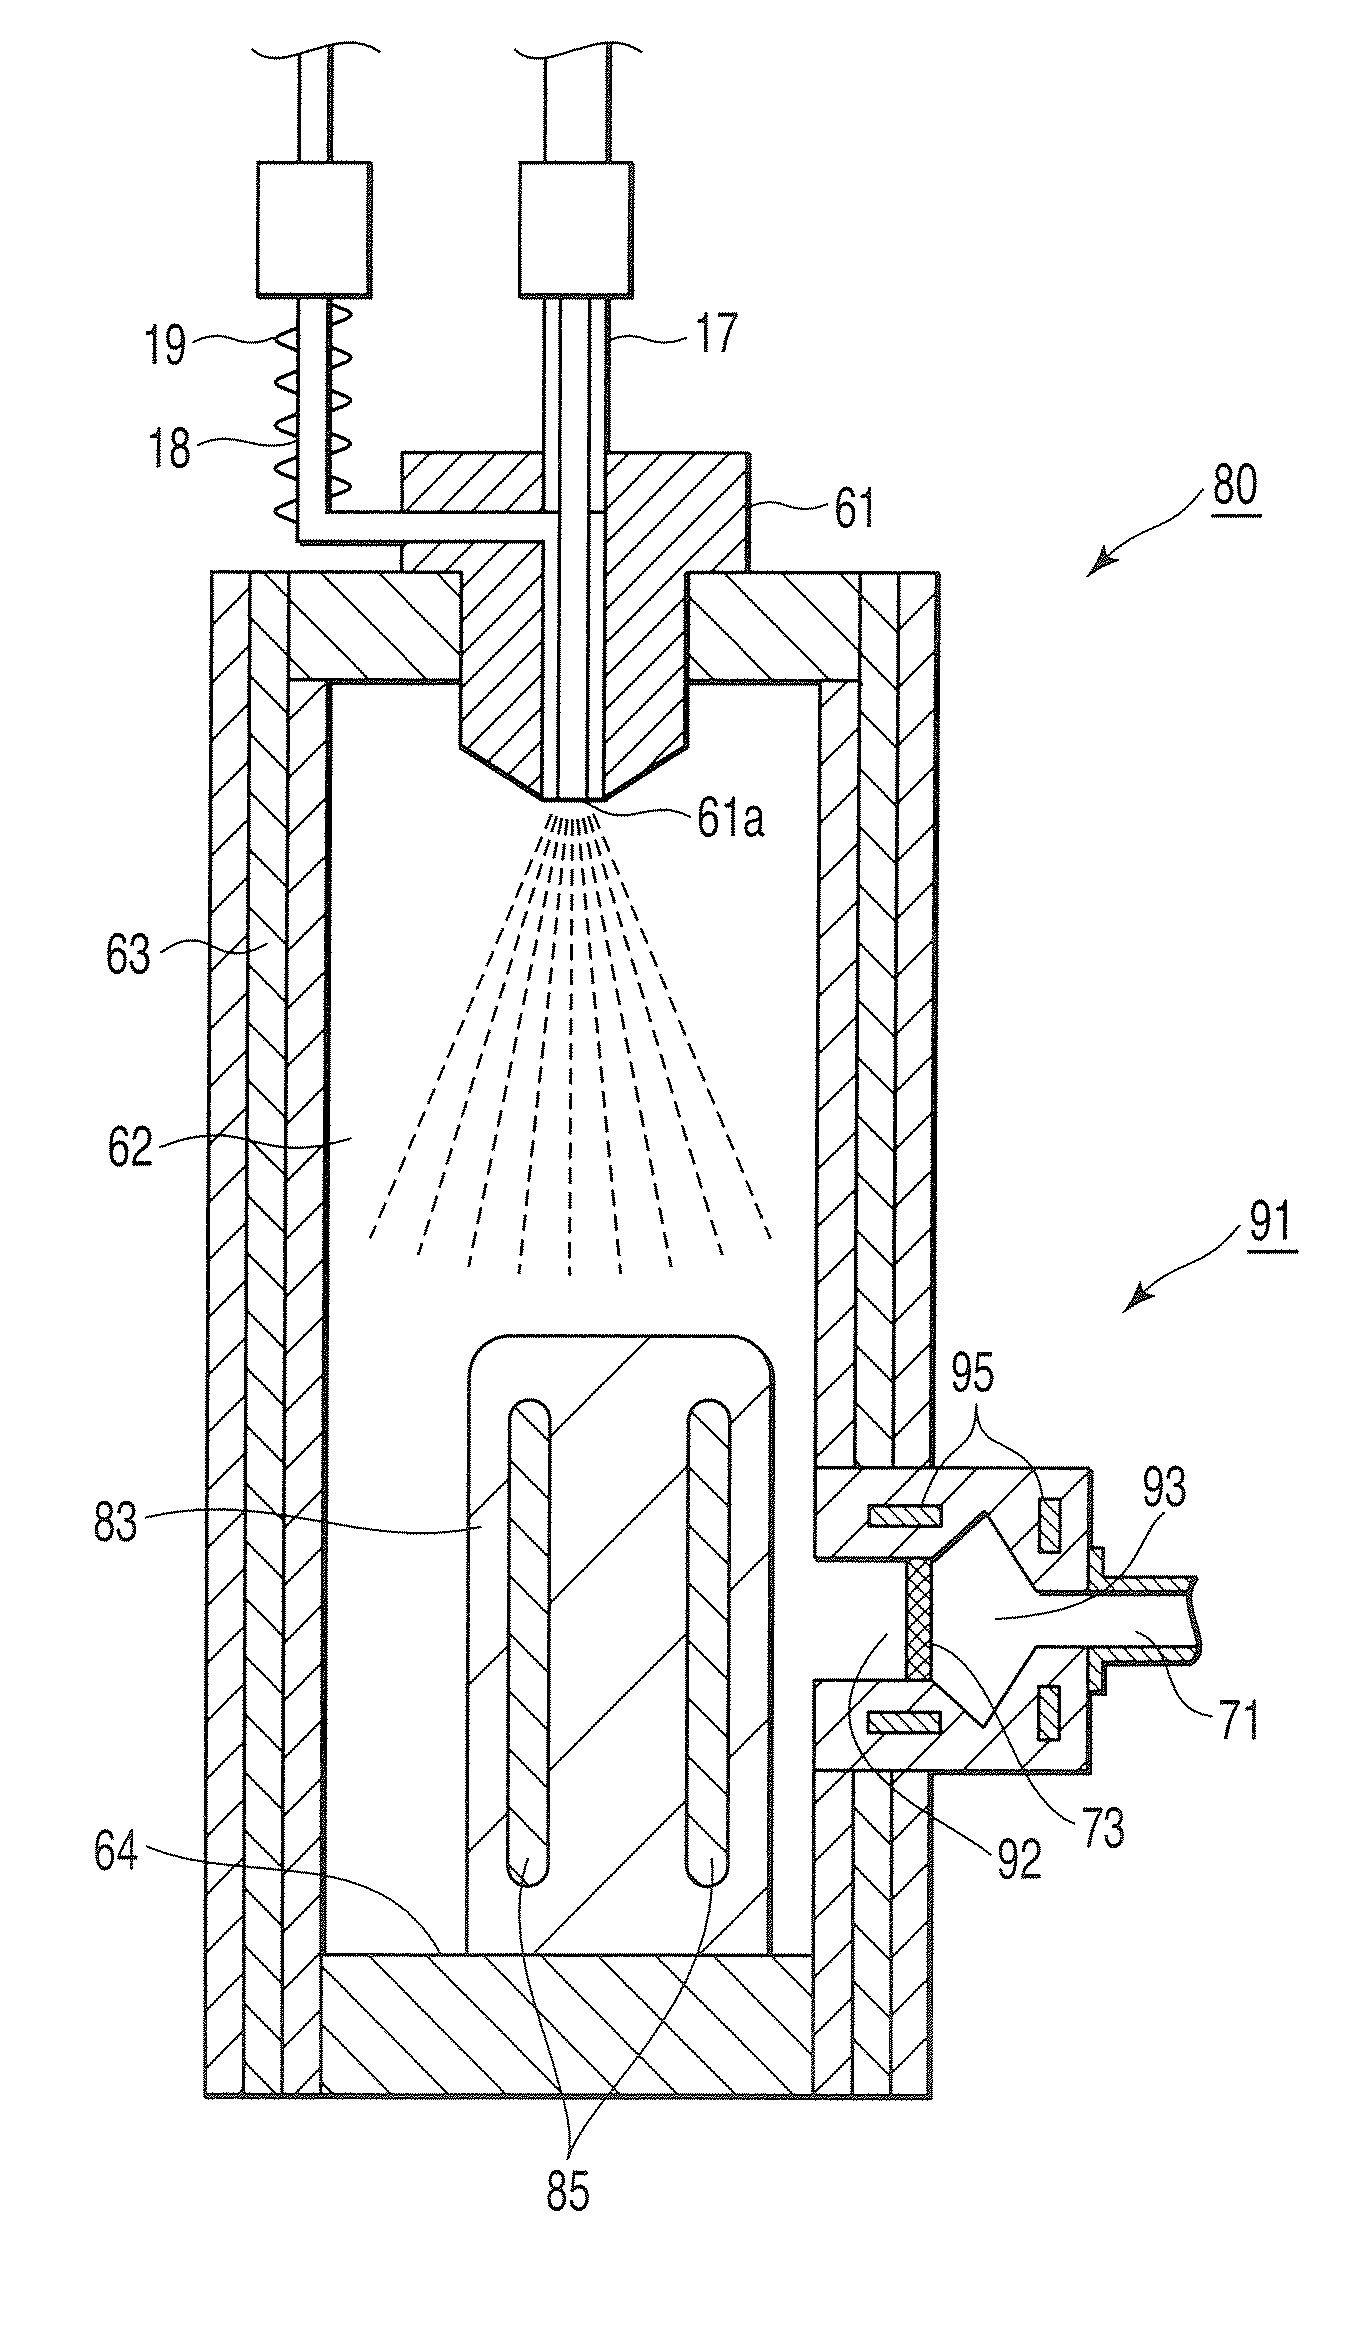 Semiconductor processing system and vaporizer